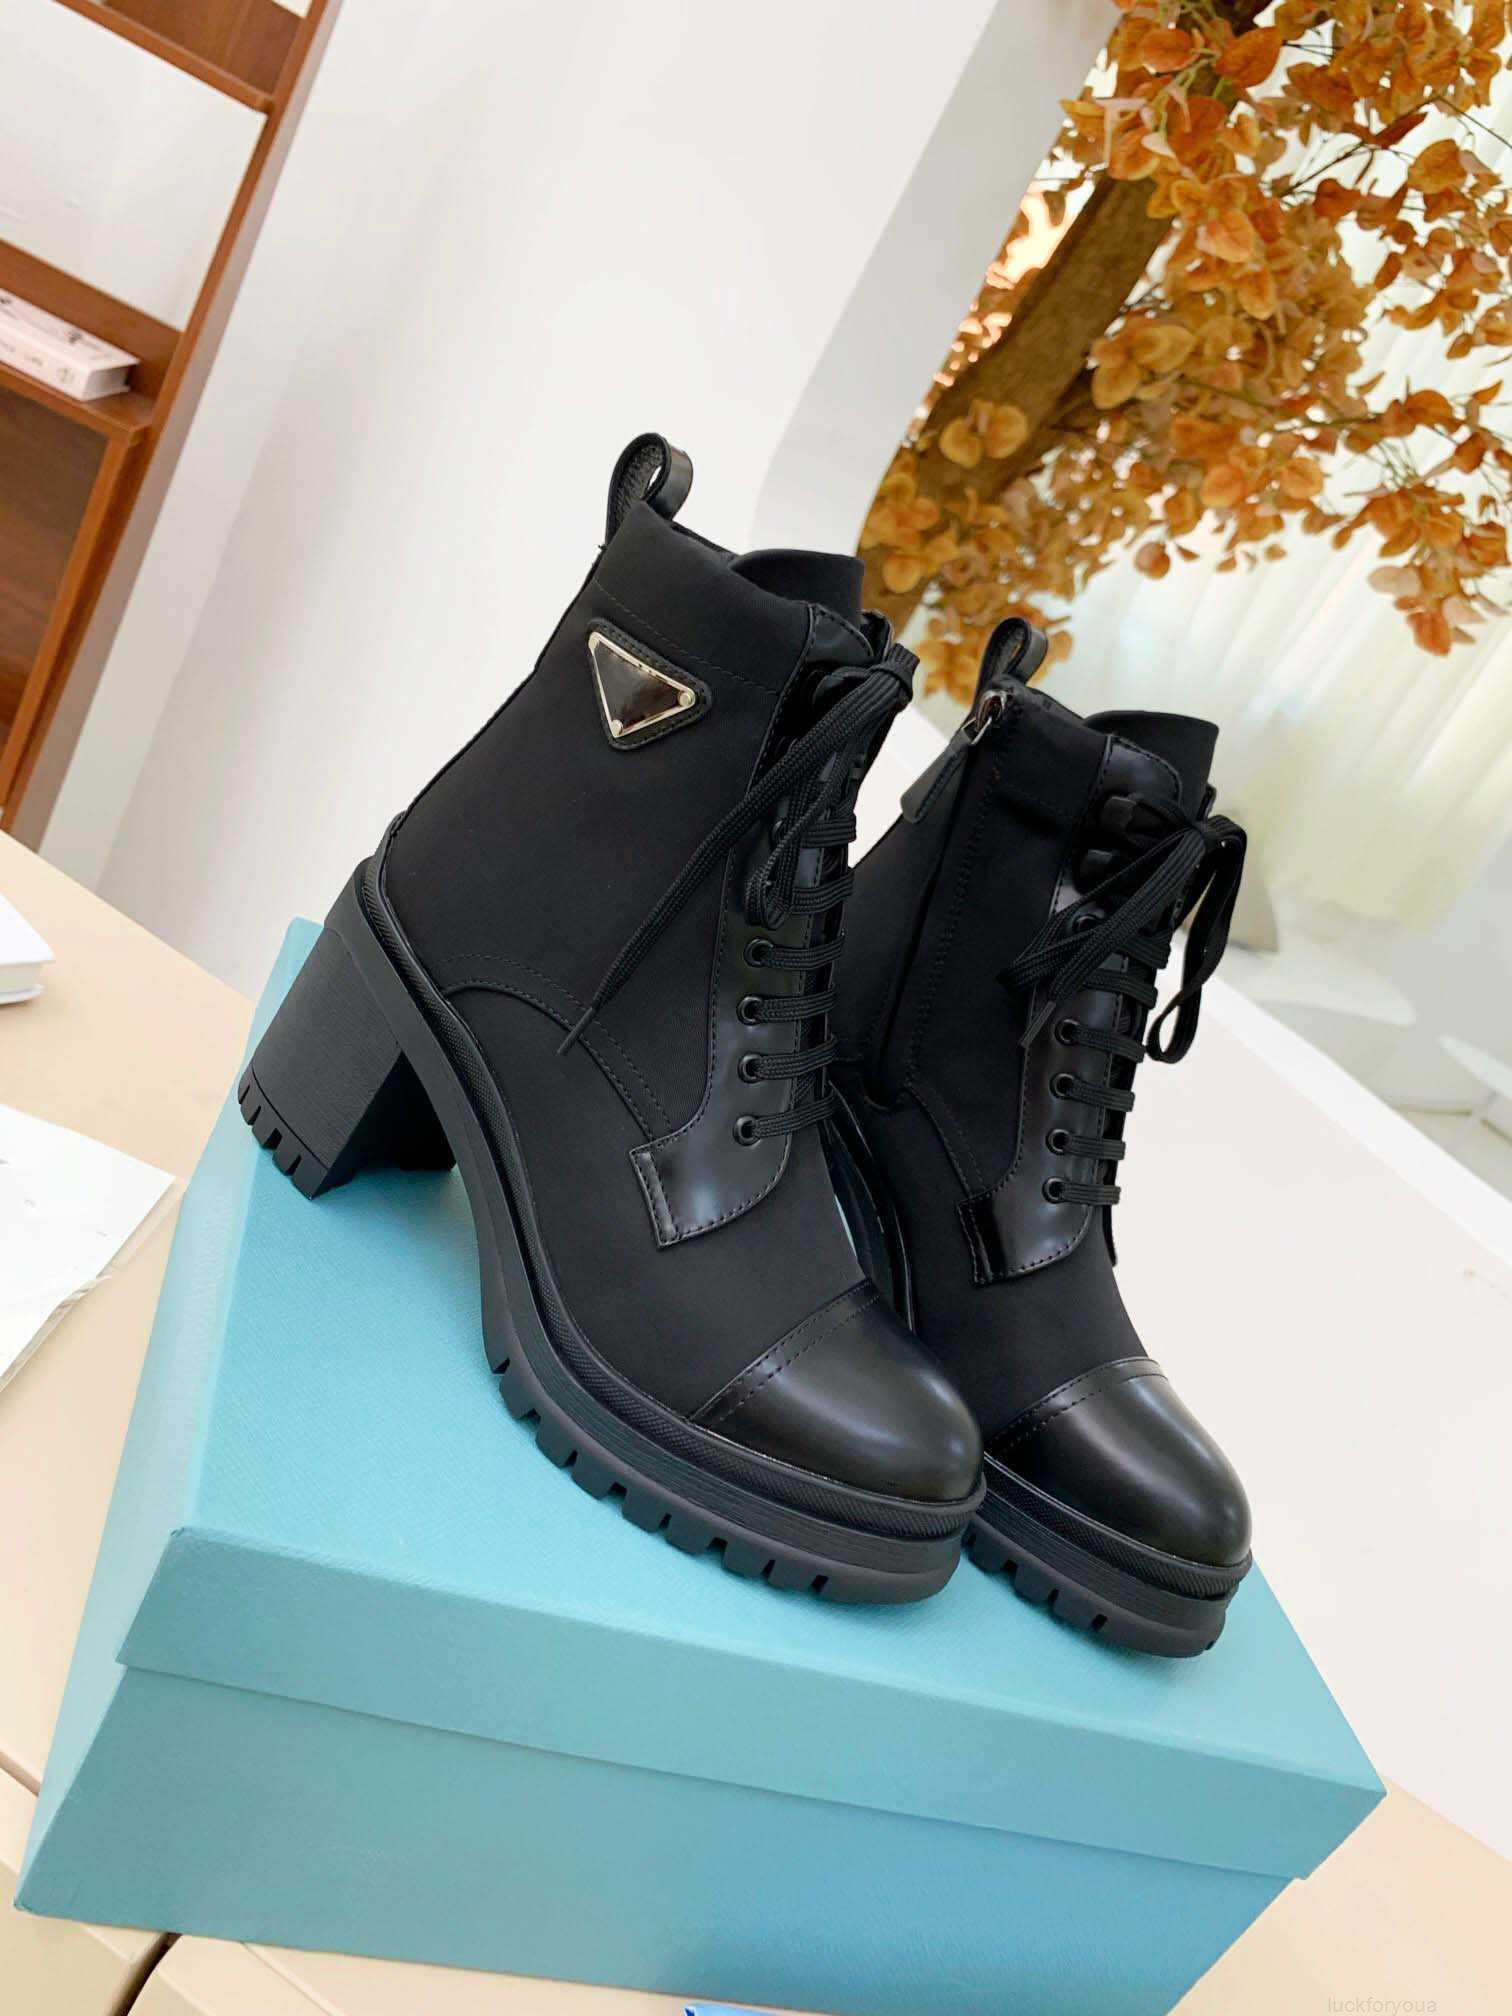 2023 Designer Leather And Nylon Ankle Boots Brushed Laced Boot Women Biker Australia Platform Heels Winter Outdoor Sneakers Size 35 -41